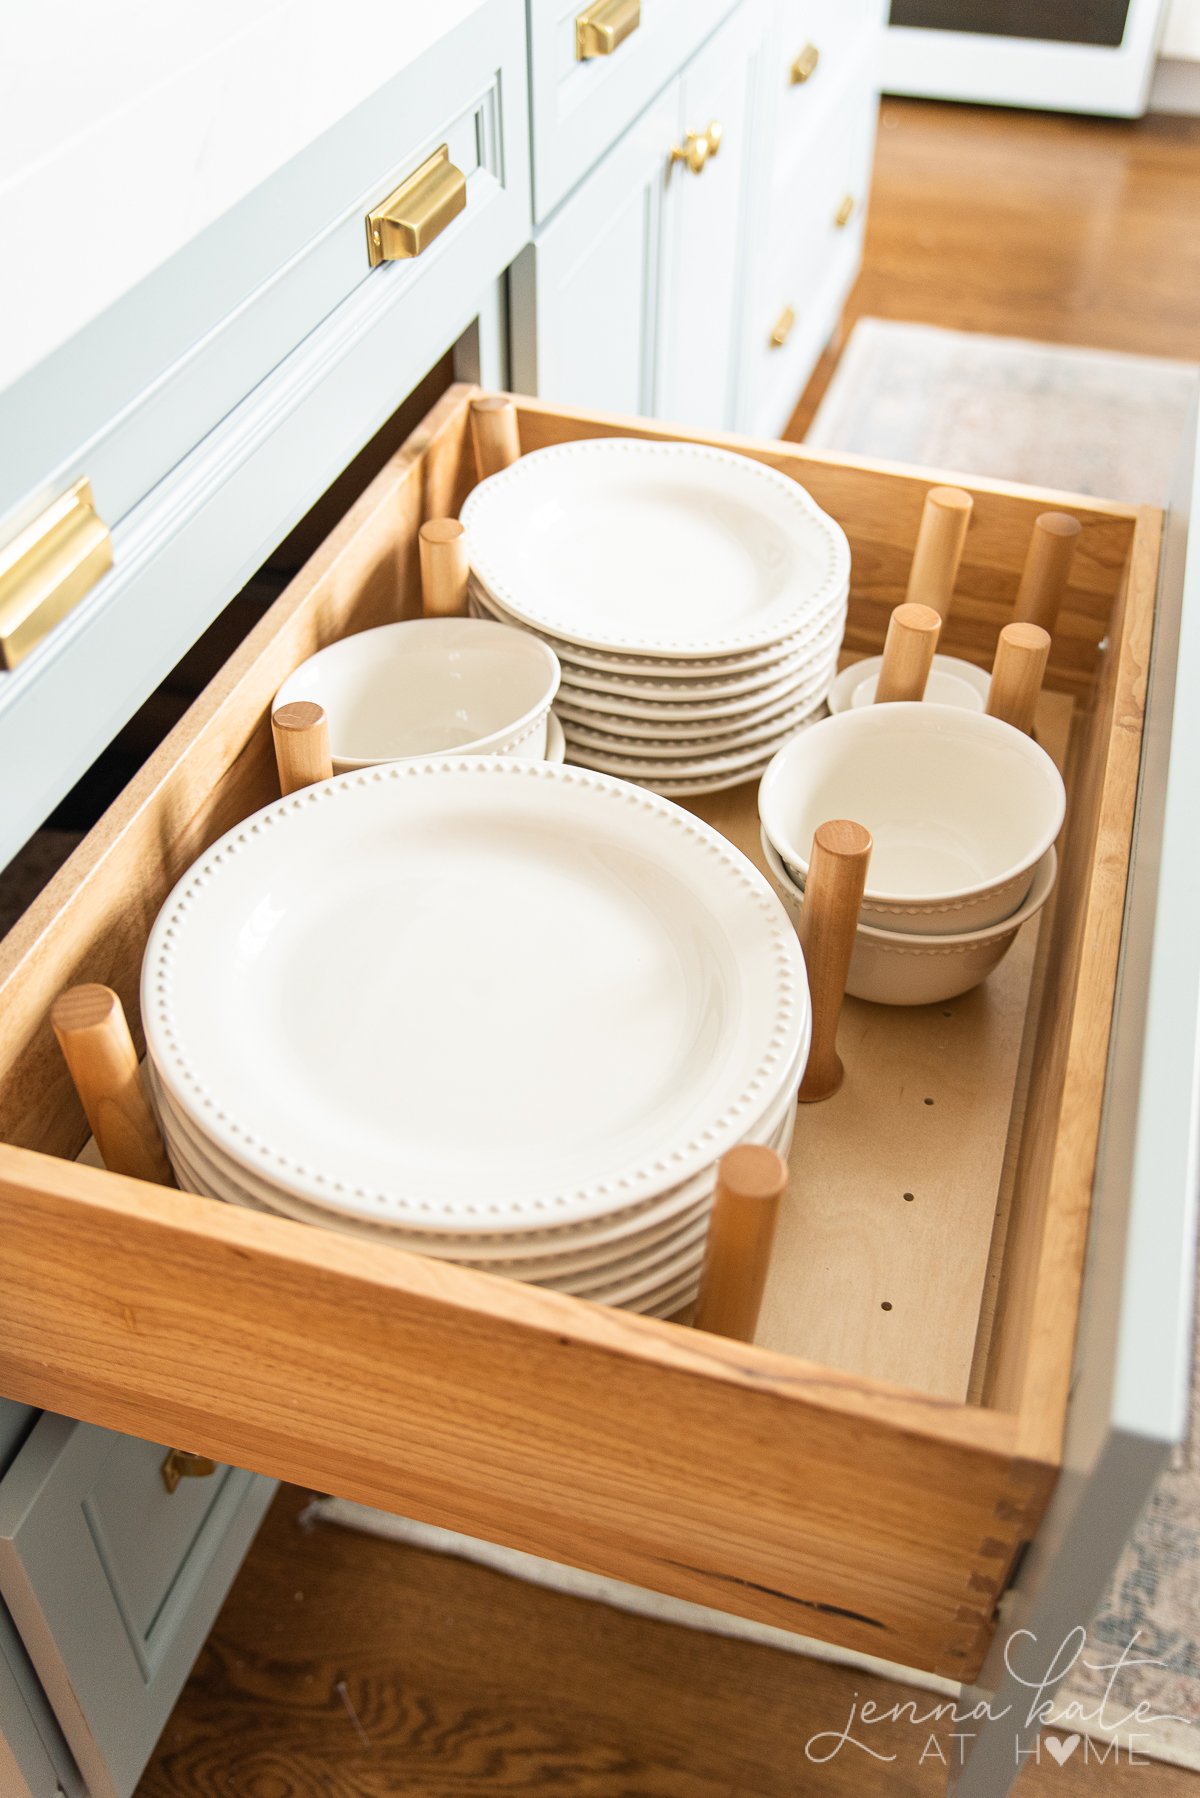 drawer with pegboard organizer for plates and bowls